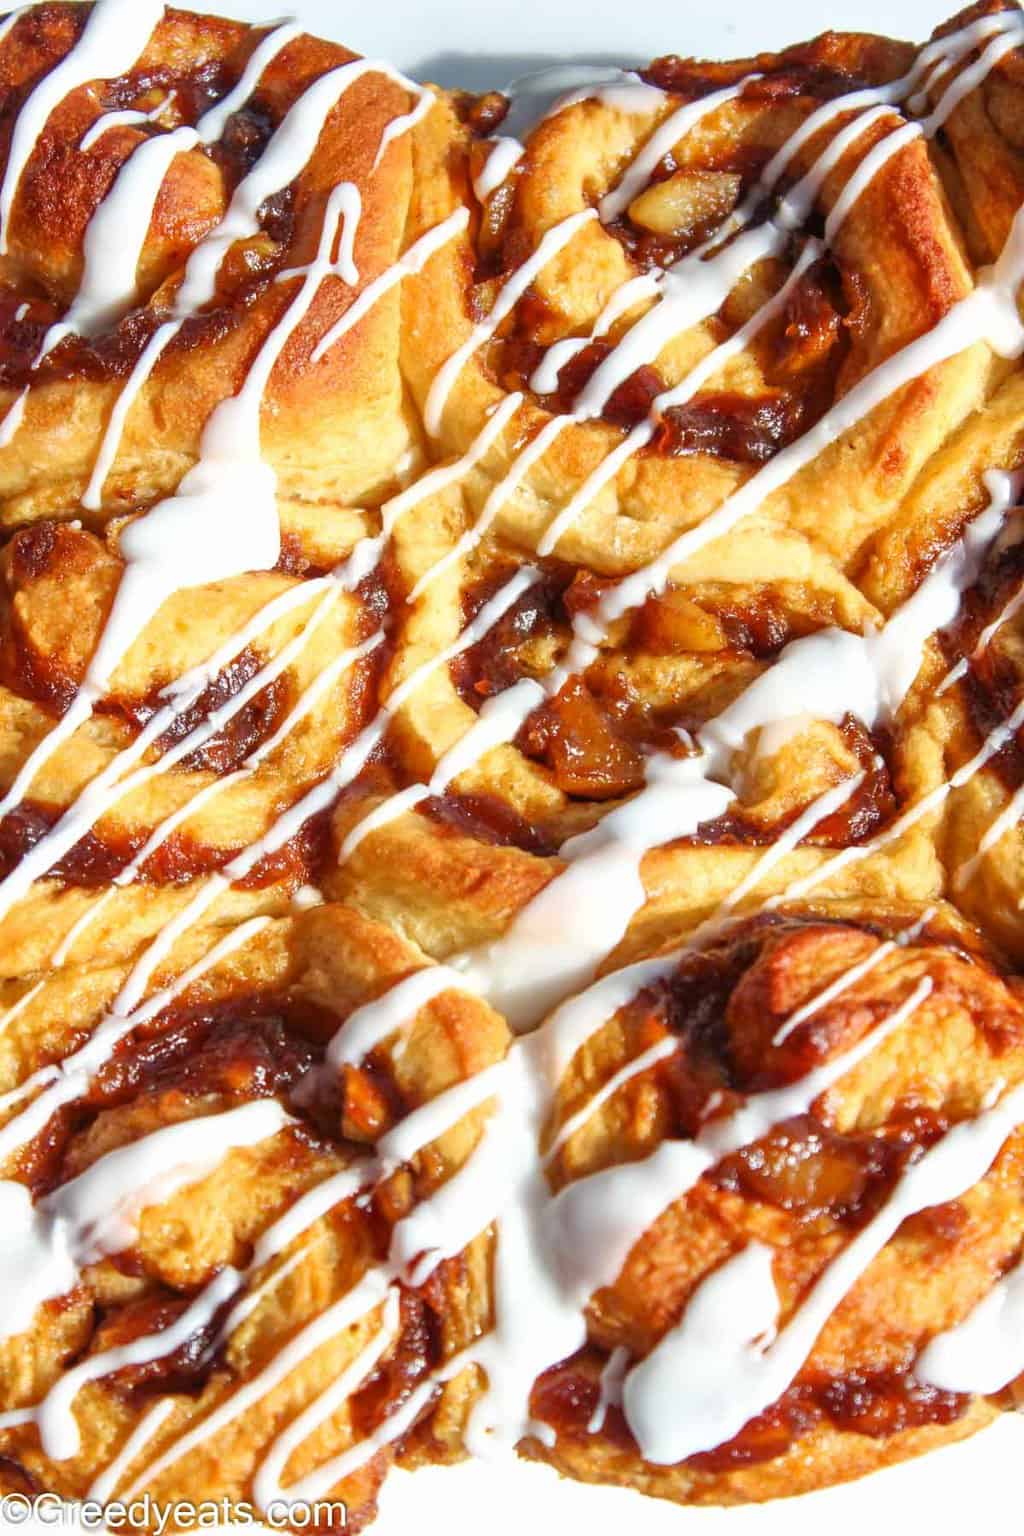 Warm and gooey apple filling is swirled in these apple cinnamon rolls recipe with sweet vanilla glaze.